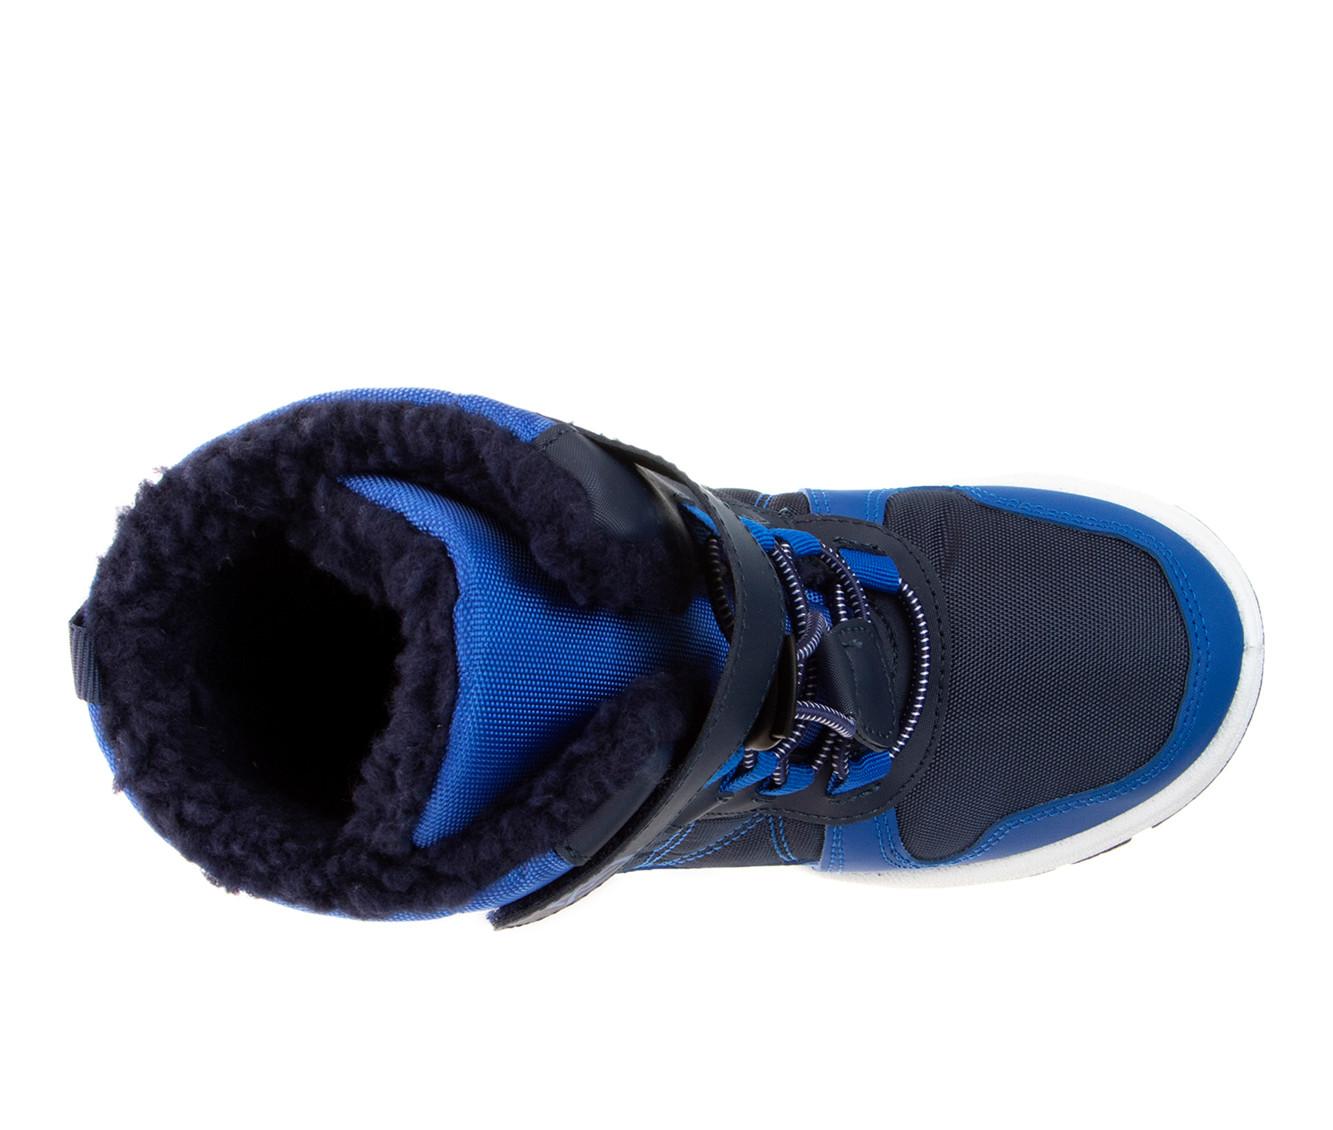 Boys' Avalanche Little Kid & Big Kid Cool Groove Winter Boots